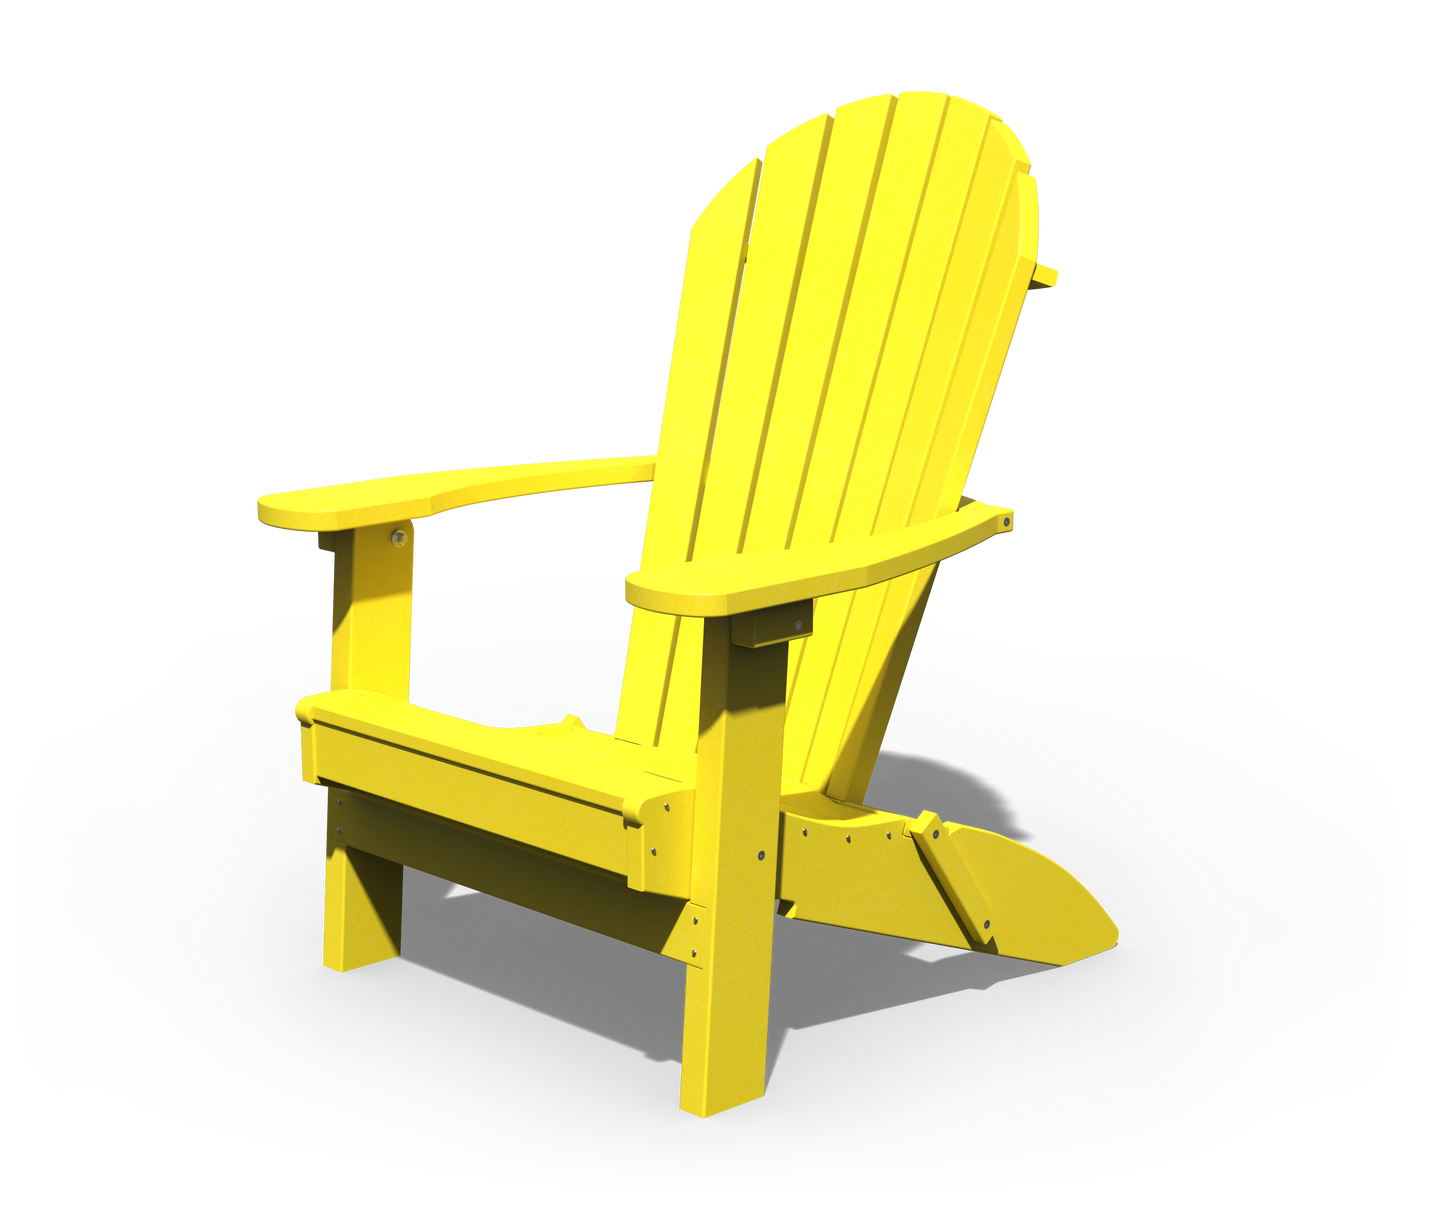 Patiova Recycled Plastic Amish Crafted Adirondack Folding Chair - LEAD TIME TO SHIP 3 WEEKS